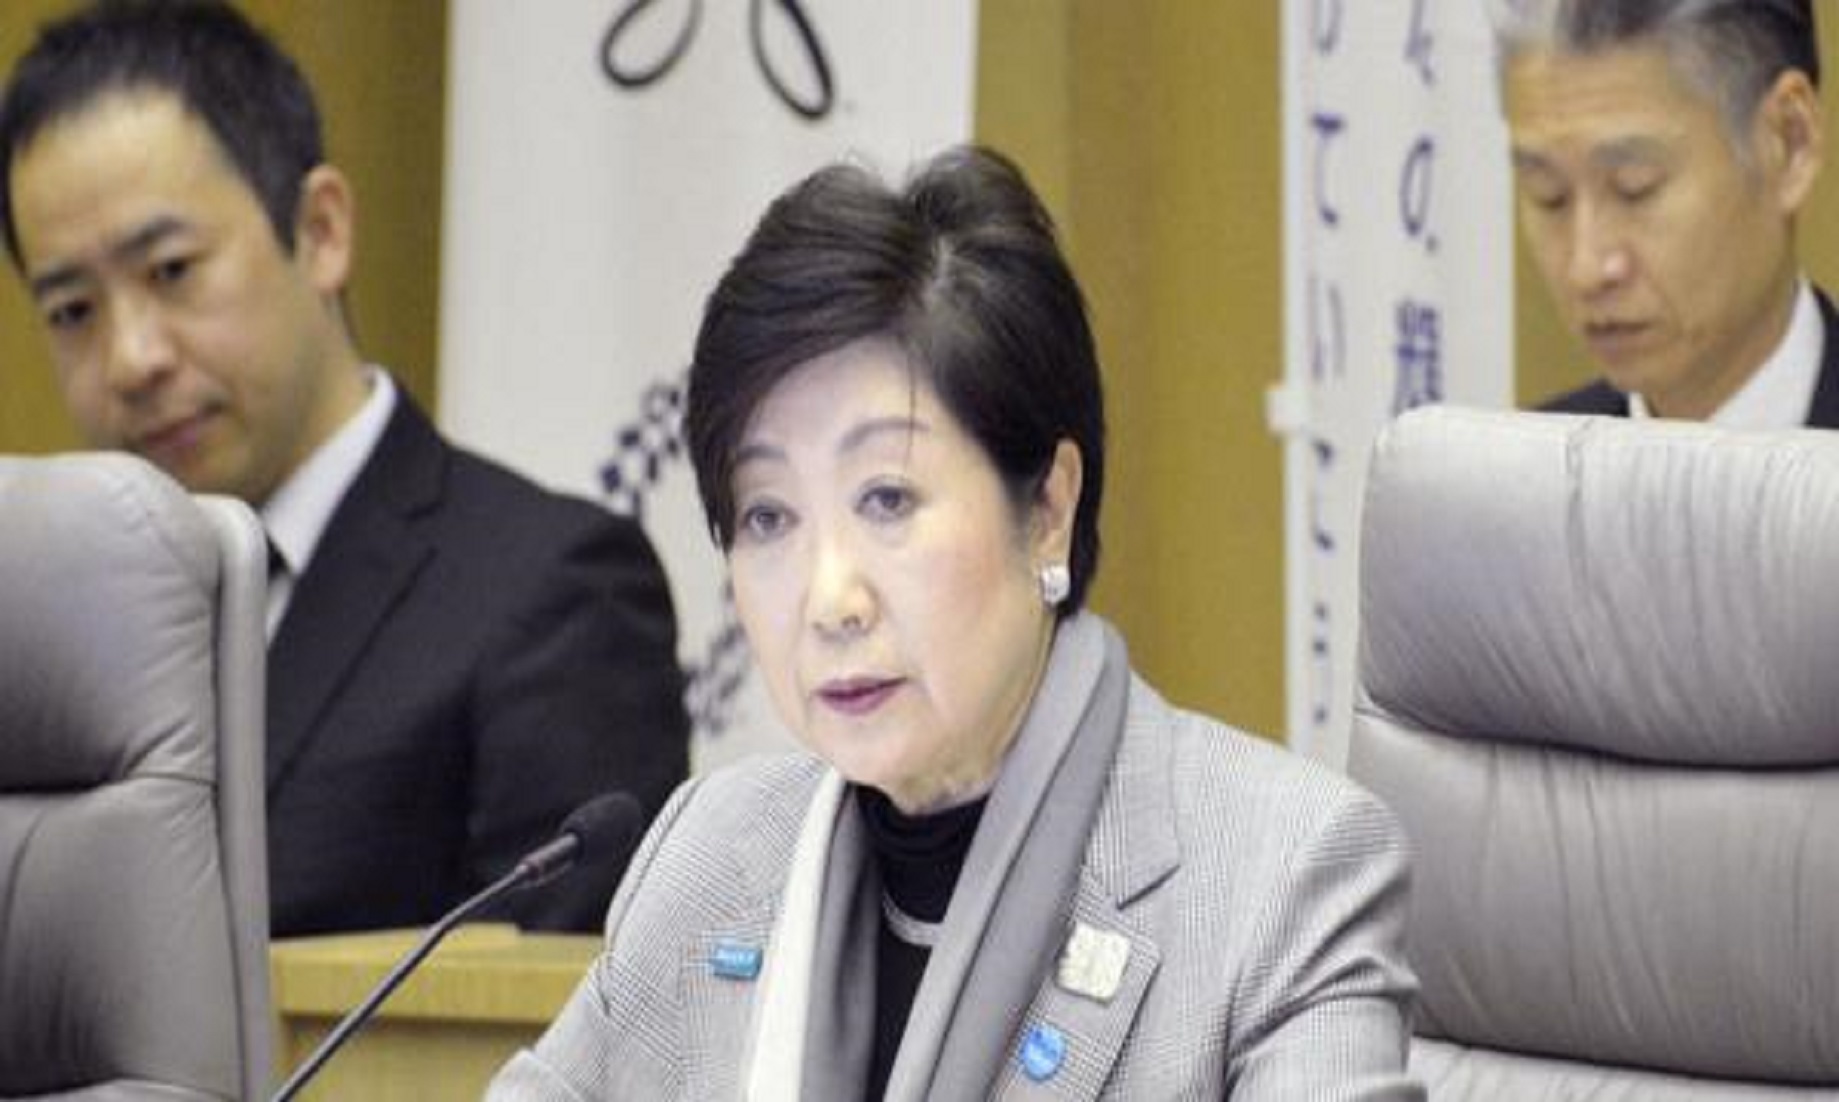 Tokyo 2020 Looks To Work Closer With Newly Elected Governor Koike